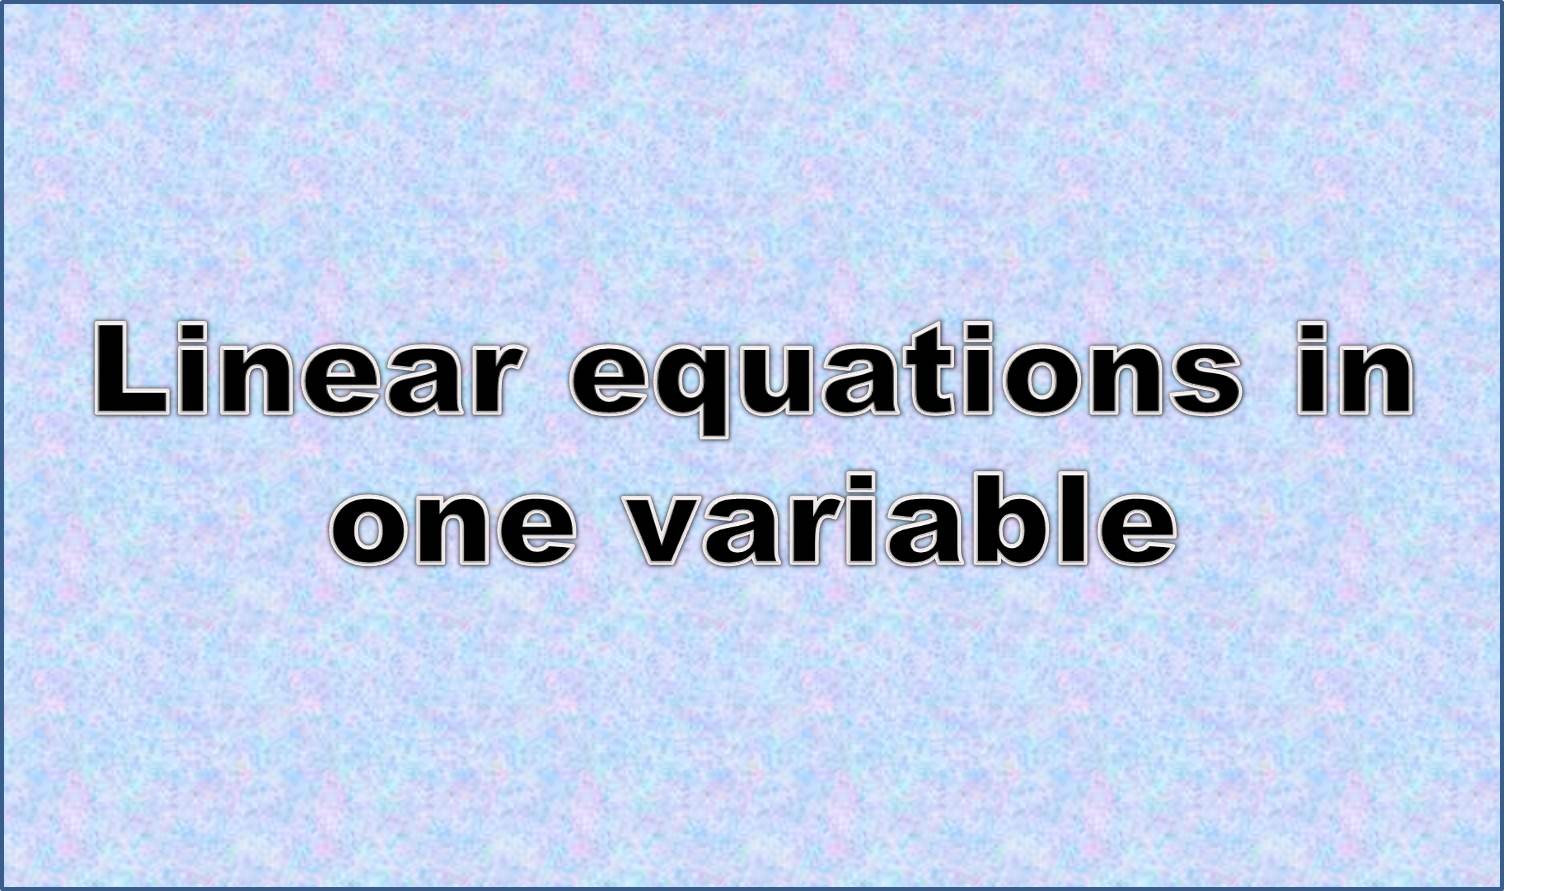 http://study.aisectonline.com/images/Intro to equations with variables on both sides.jpg